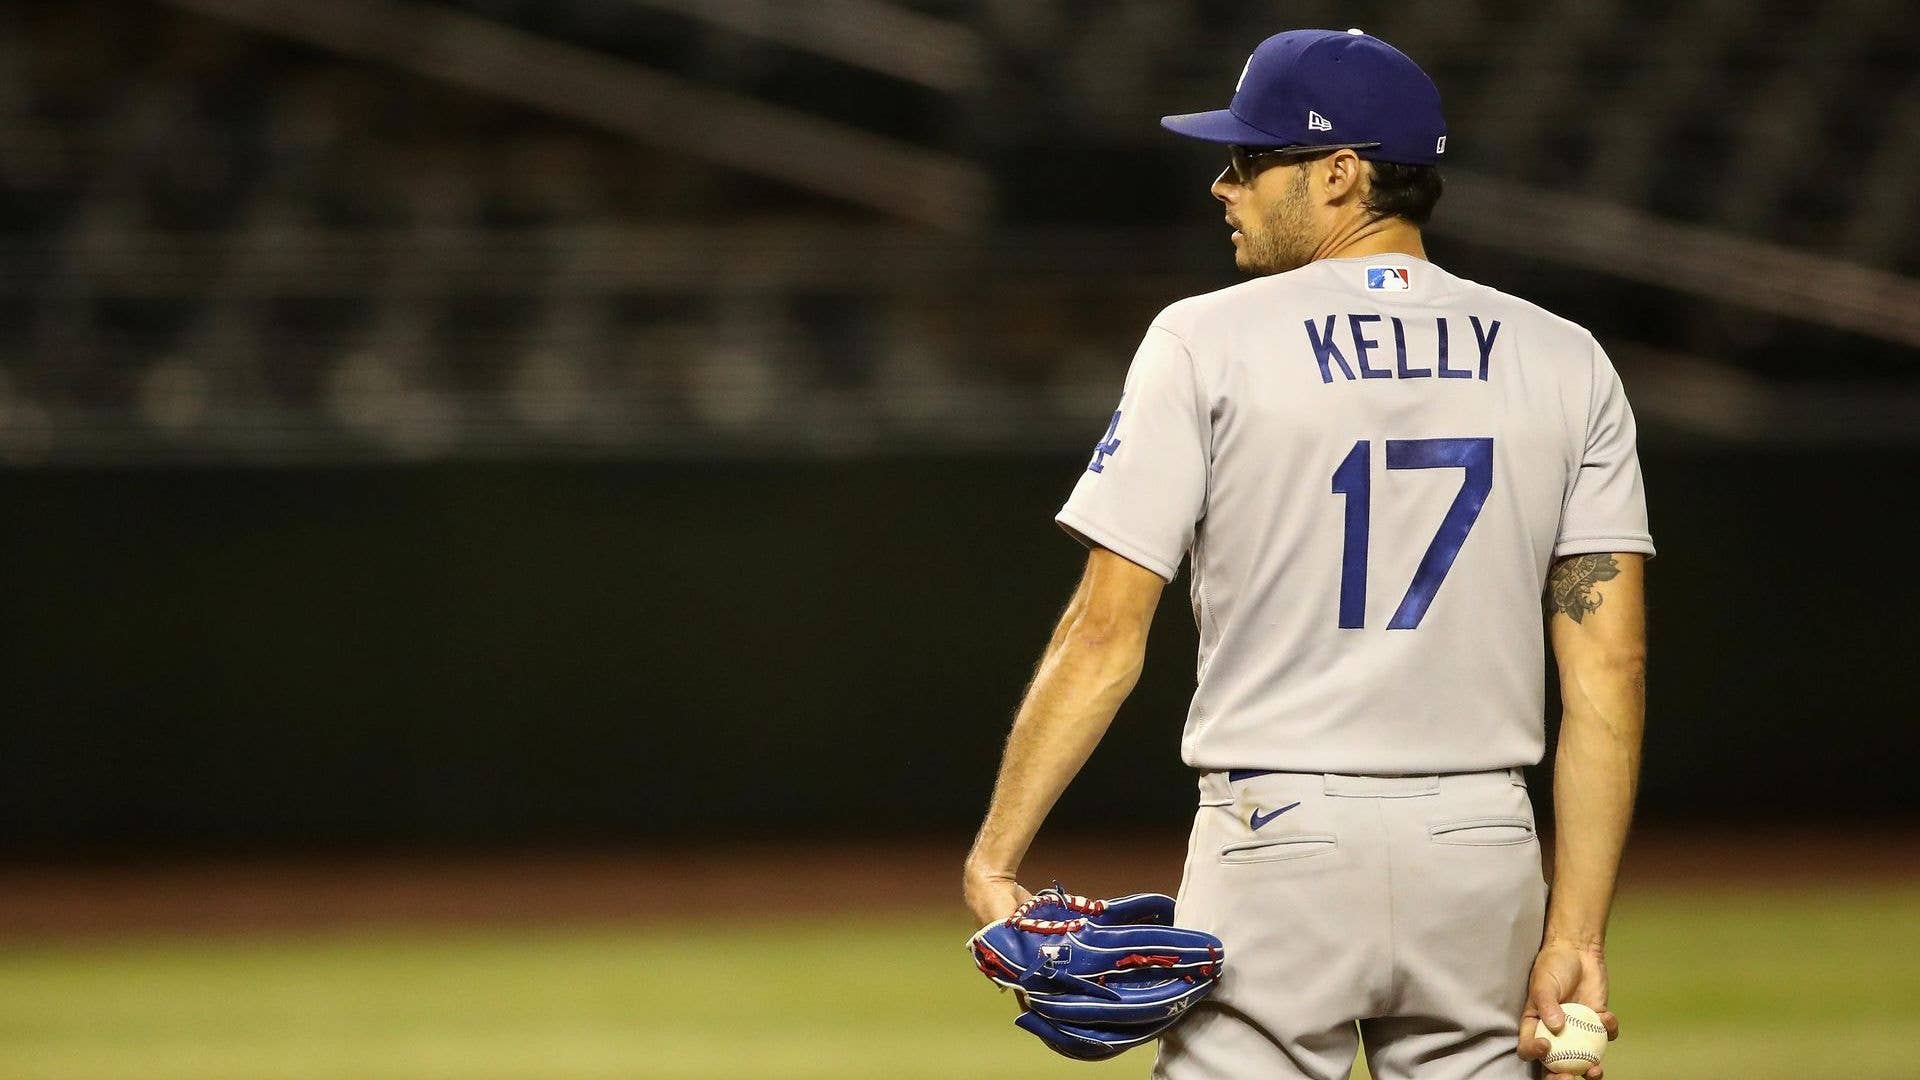 L.A. Dodgers' Joe Kelly Calls Astros 'Cheaters' and 'Snitches